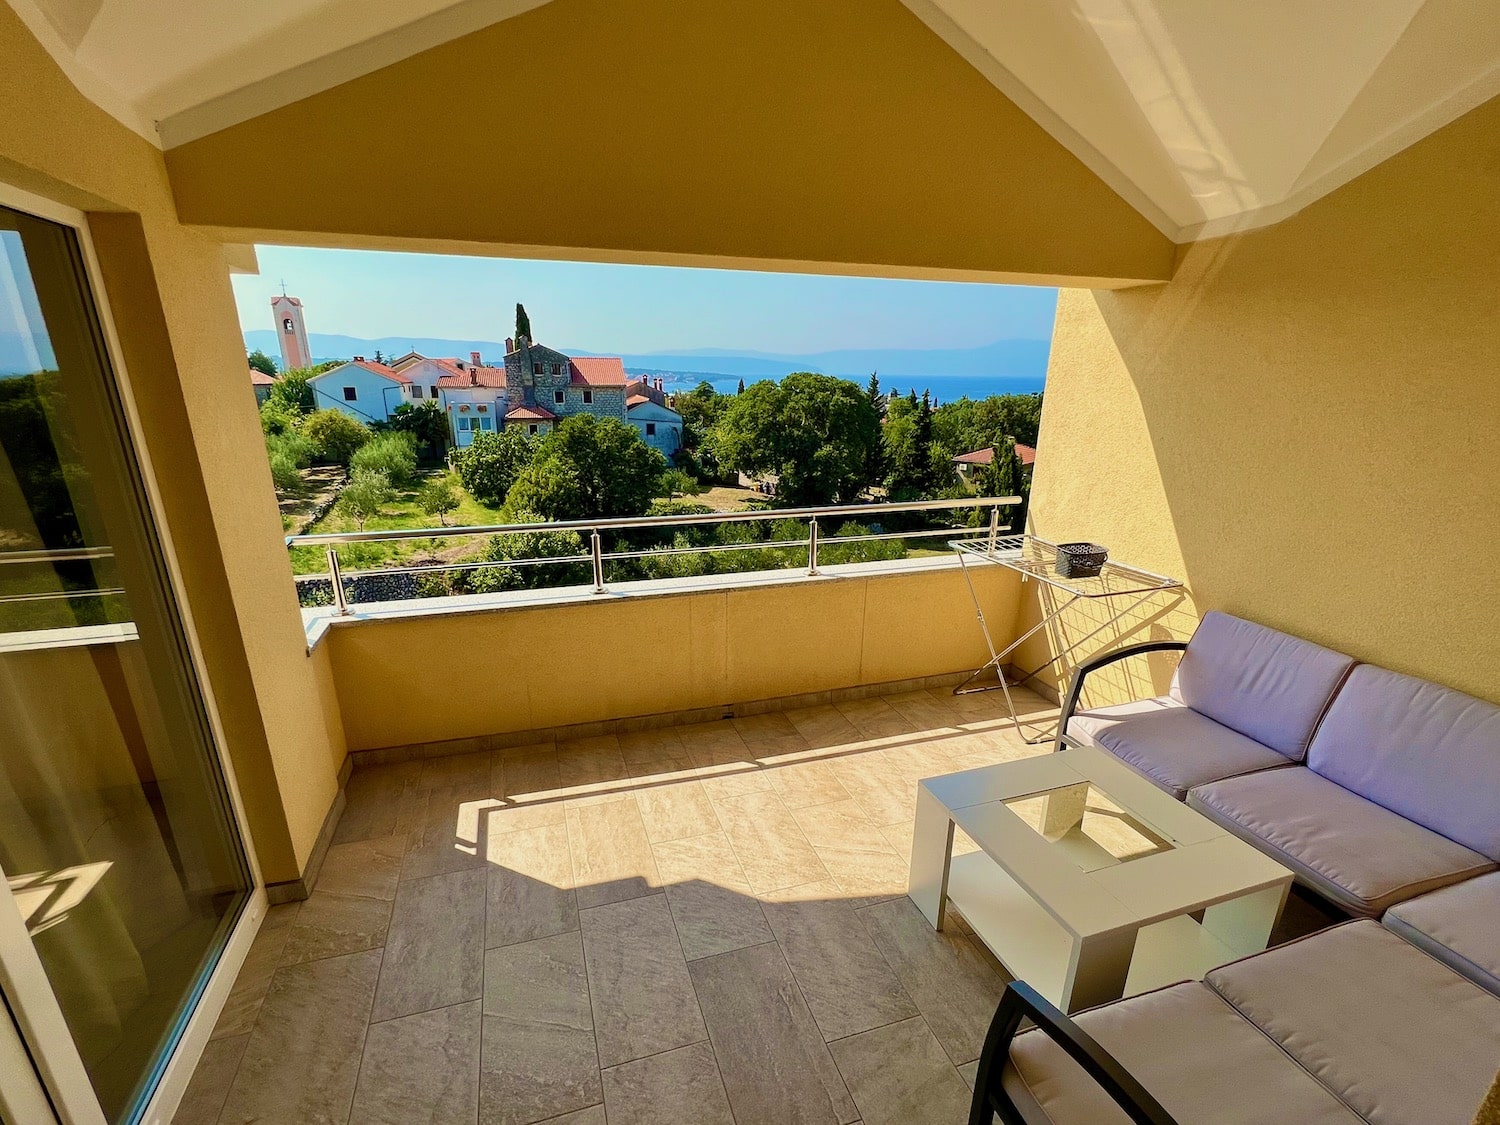 With a view of the olive grove and historical buildings – my spacious holiday apartment in Malinska is a stunner. Photo: Sascha Tegtmeyer Sol Villas Sol Tours Krk Experiences Reviews Reviews